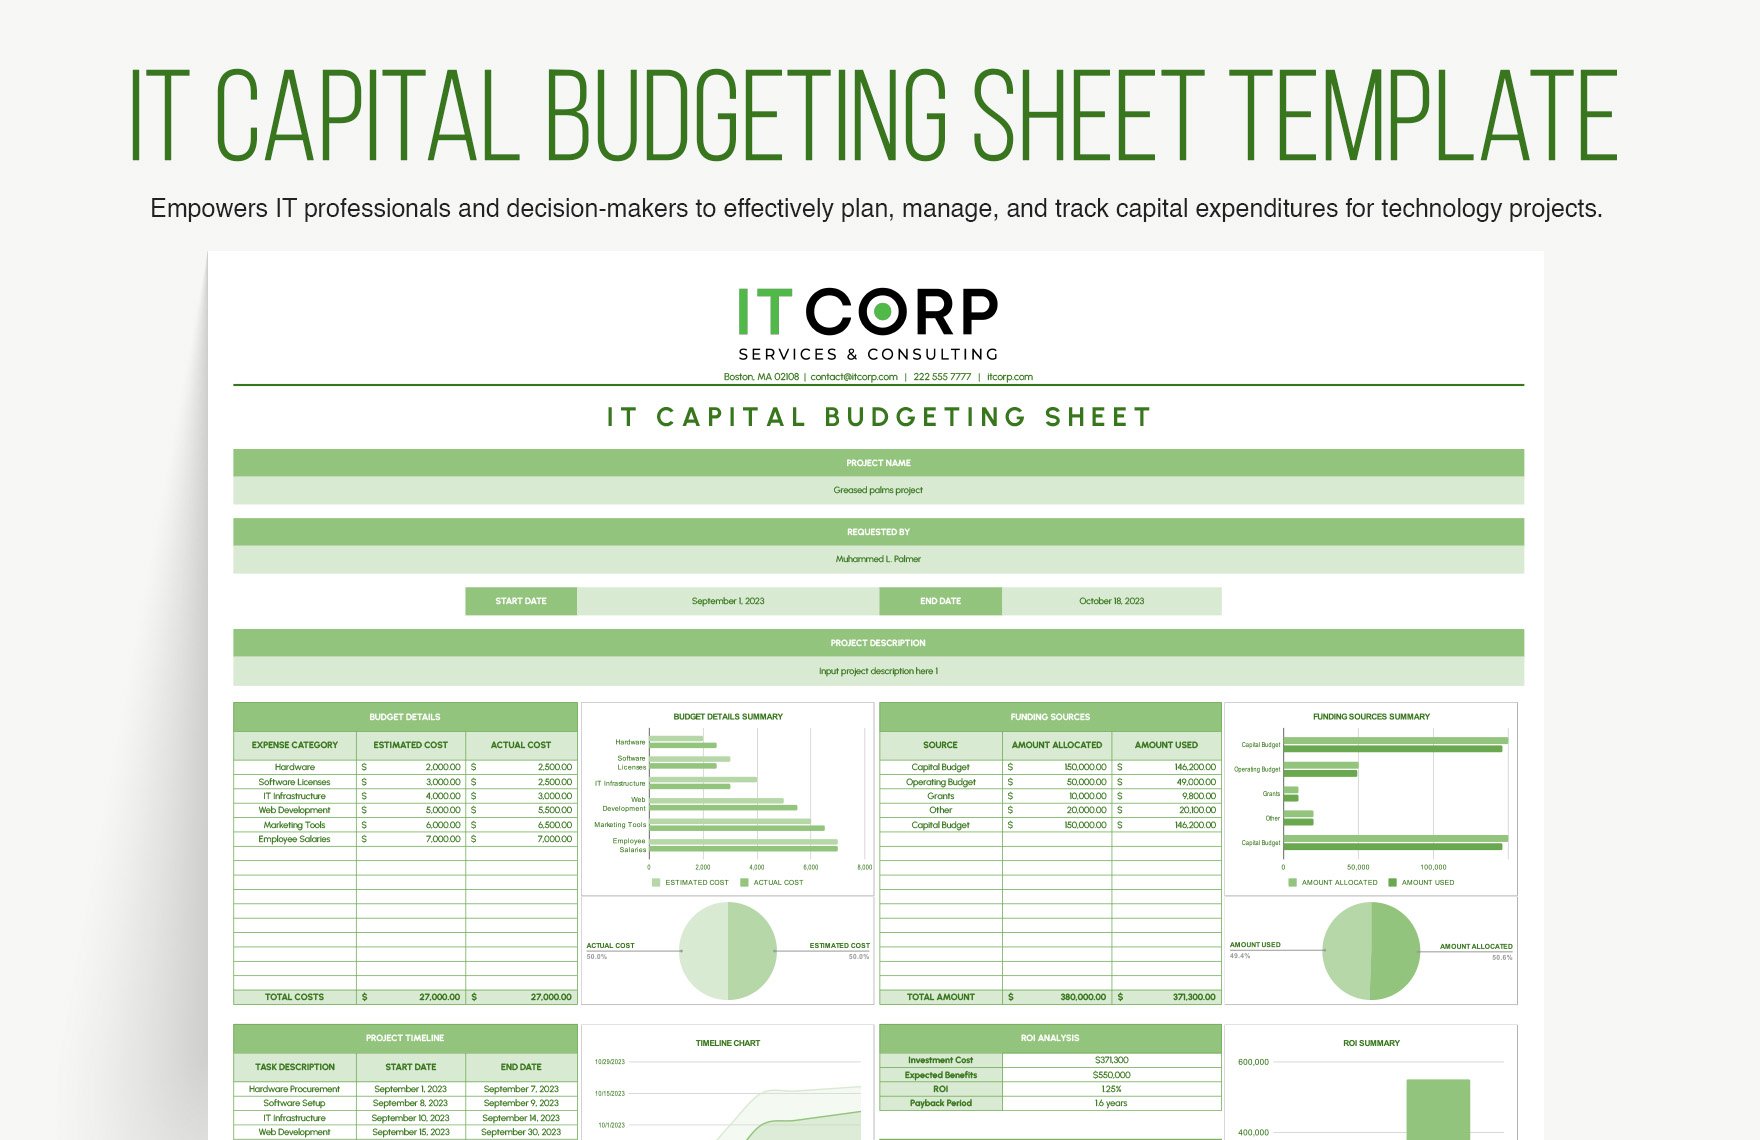 IT Capital Budgeting Sheet Template in Excel, Google Sheets